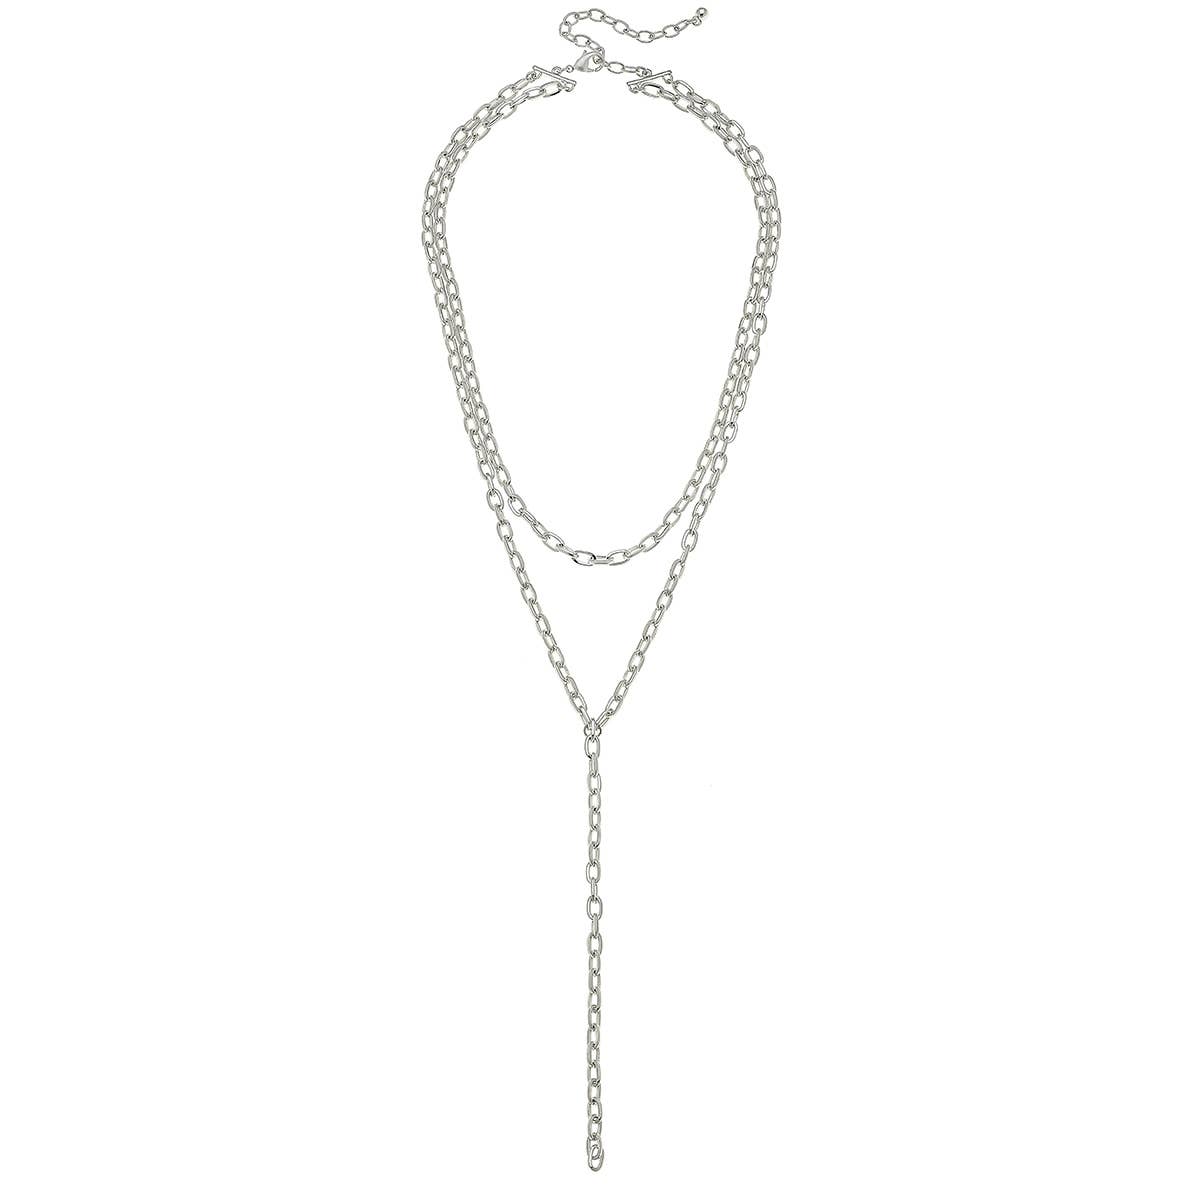 Pilar Layered Chain Y Necklace in Worn Silver - Pink Julep Boutique